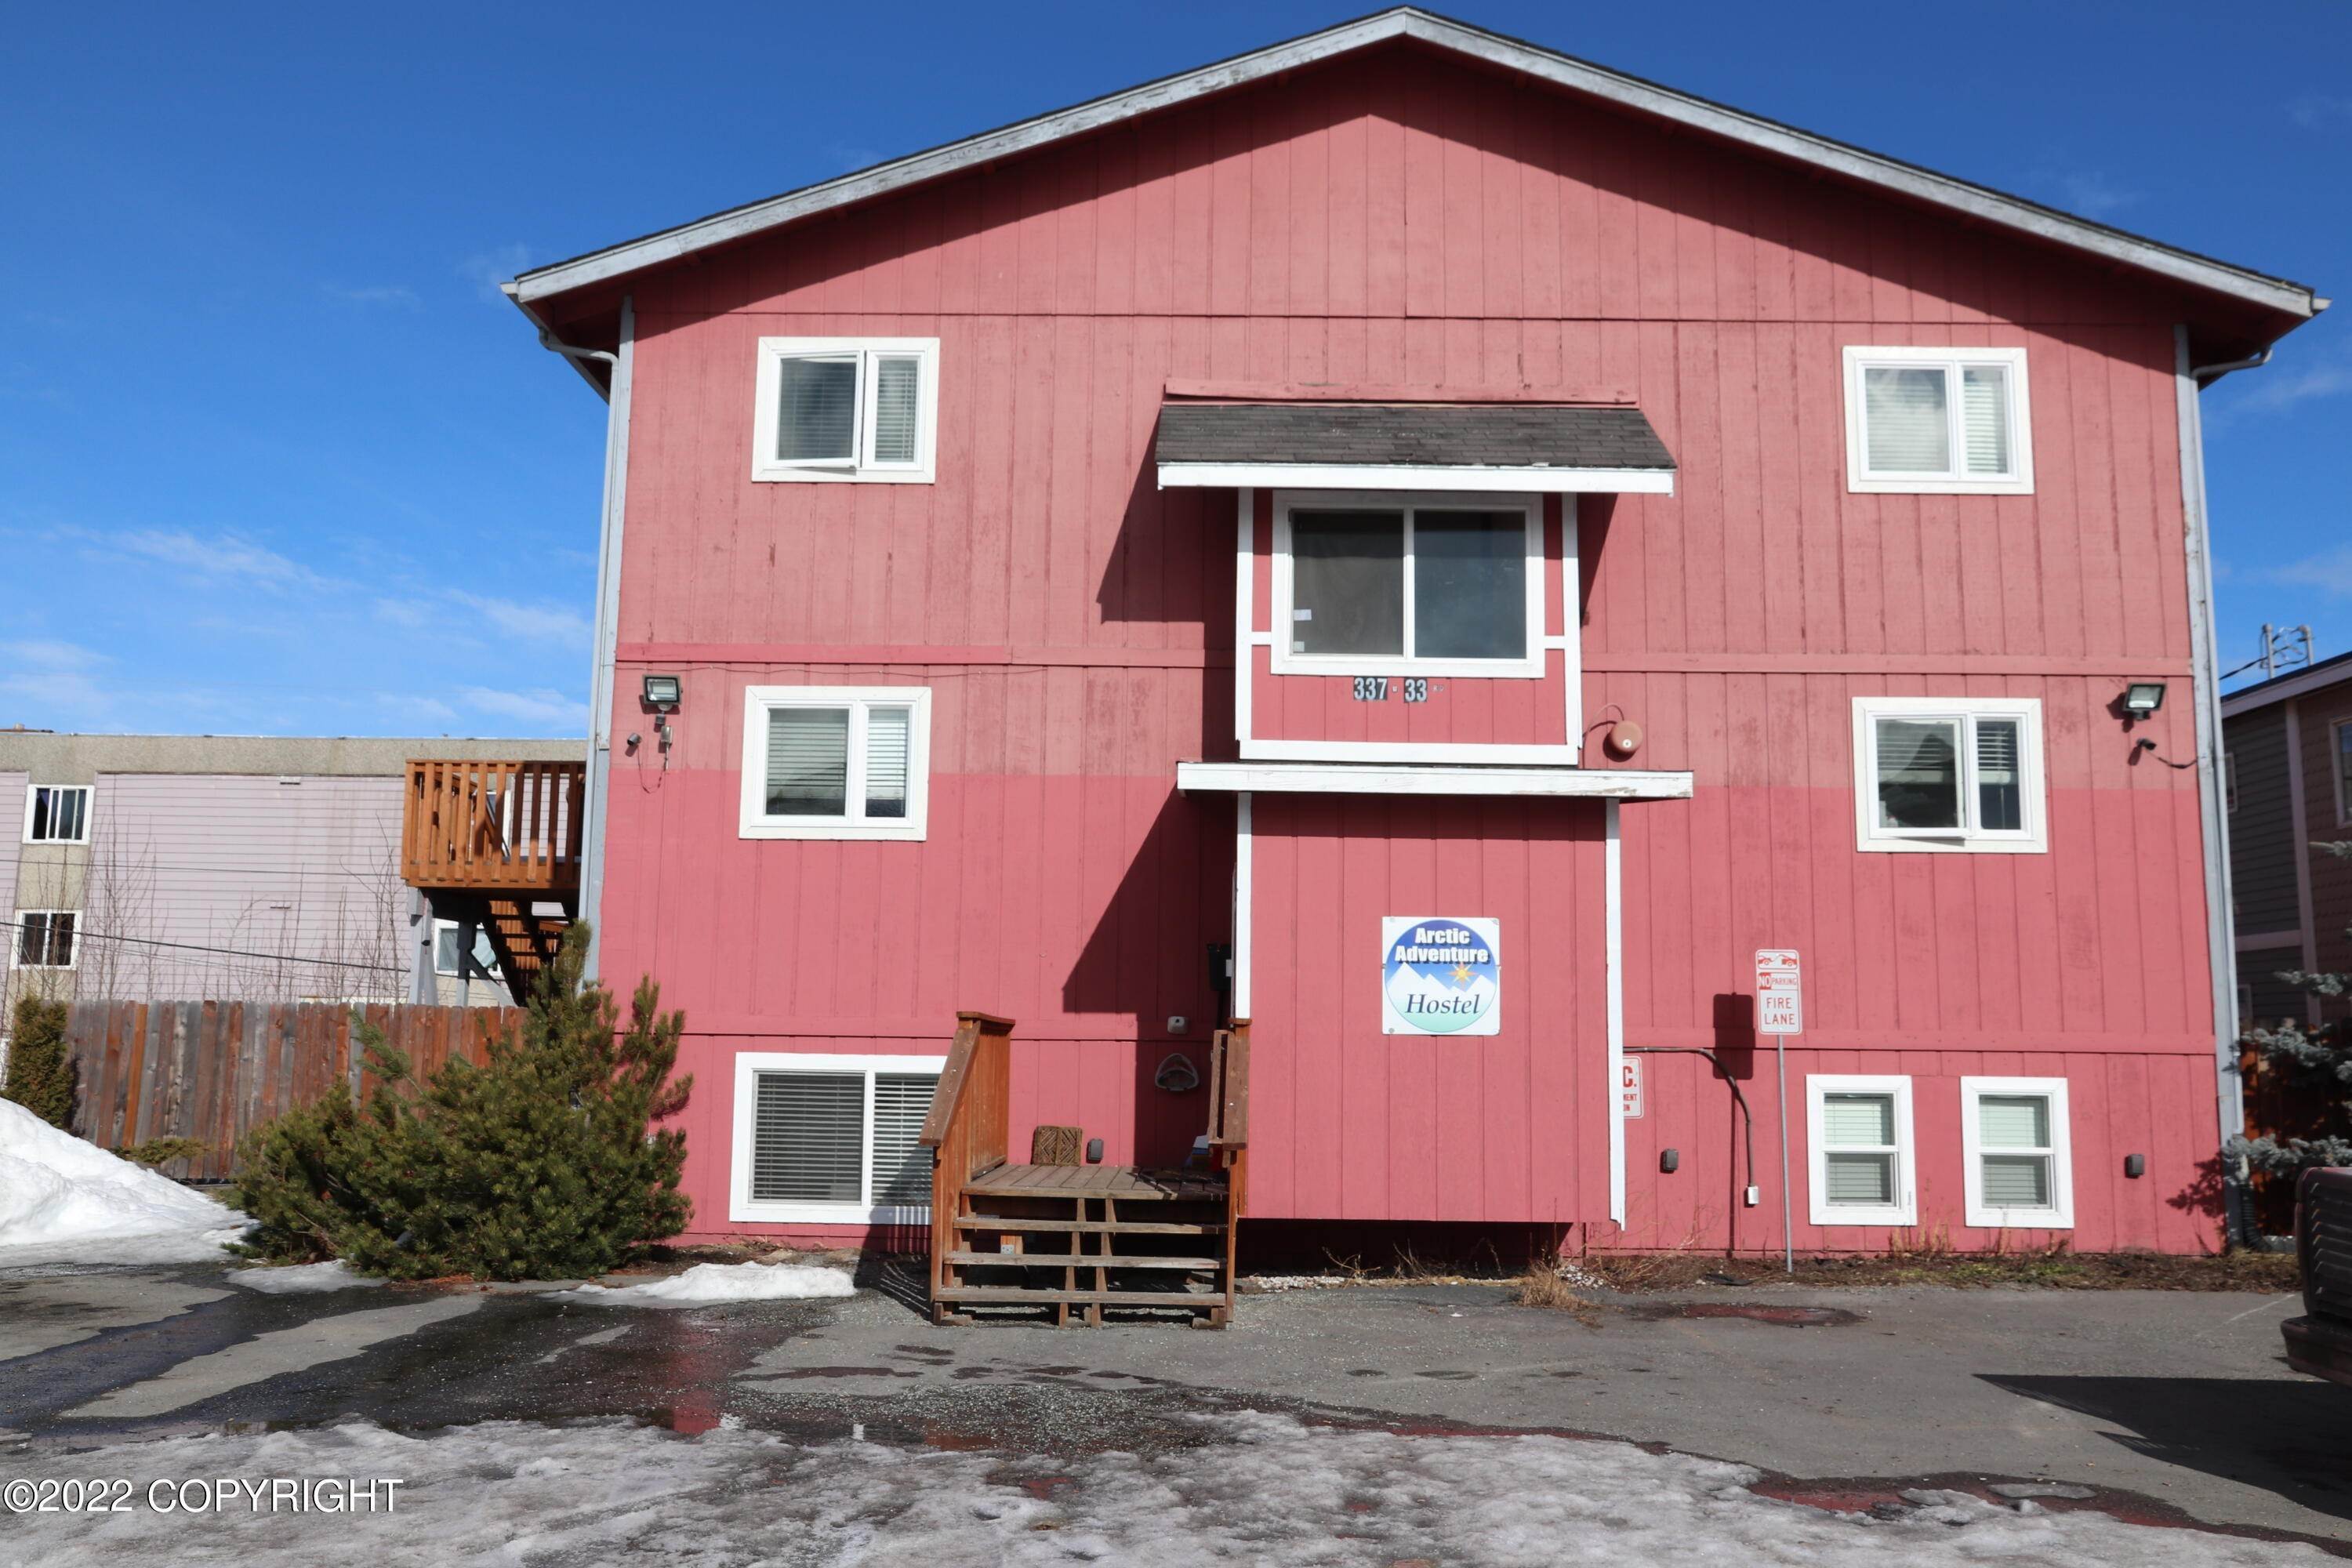 Business Opportunity for Sale at 337 W 33rd Avenue Anchorage, Alaska 99503 United States